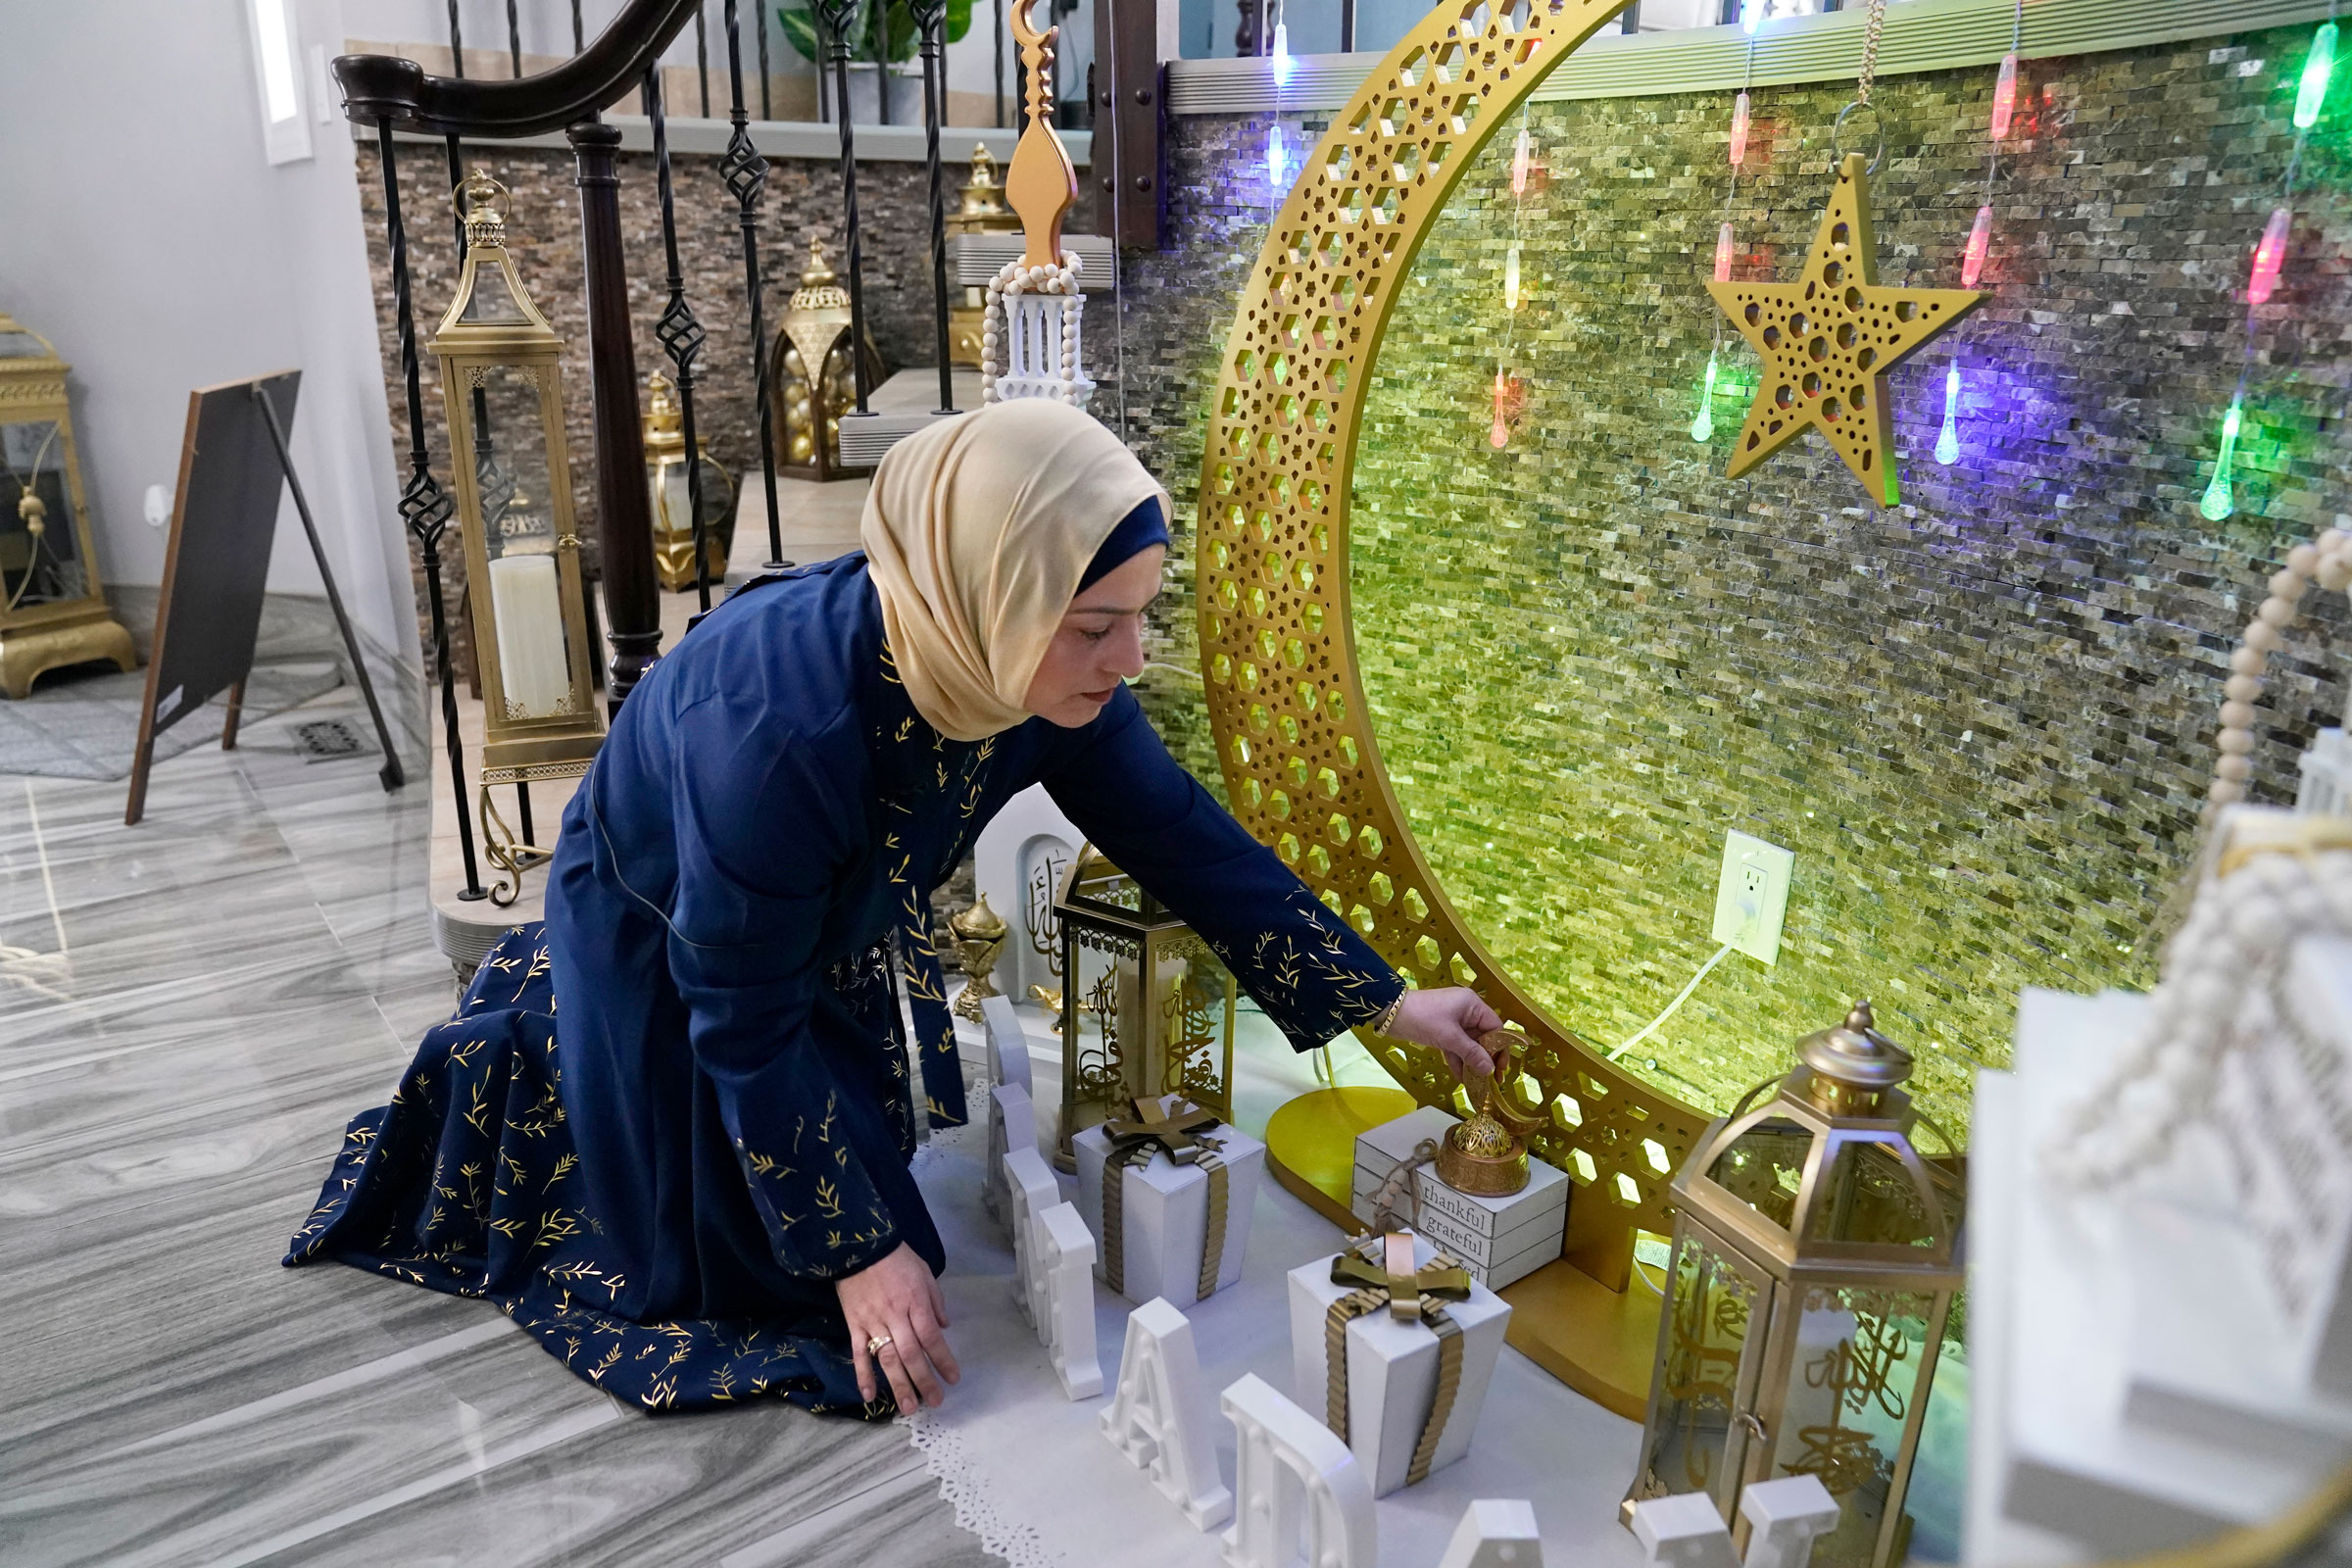 Suzanne Jaber of The Eid Shop looks at some of her company's Ramadan decorations she created, in Dearborn Heights, Mich., on March 27, 2023. (Carlos Osorio - AP)